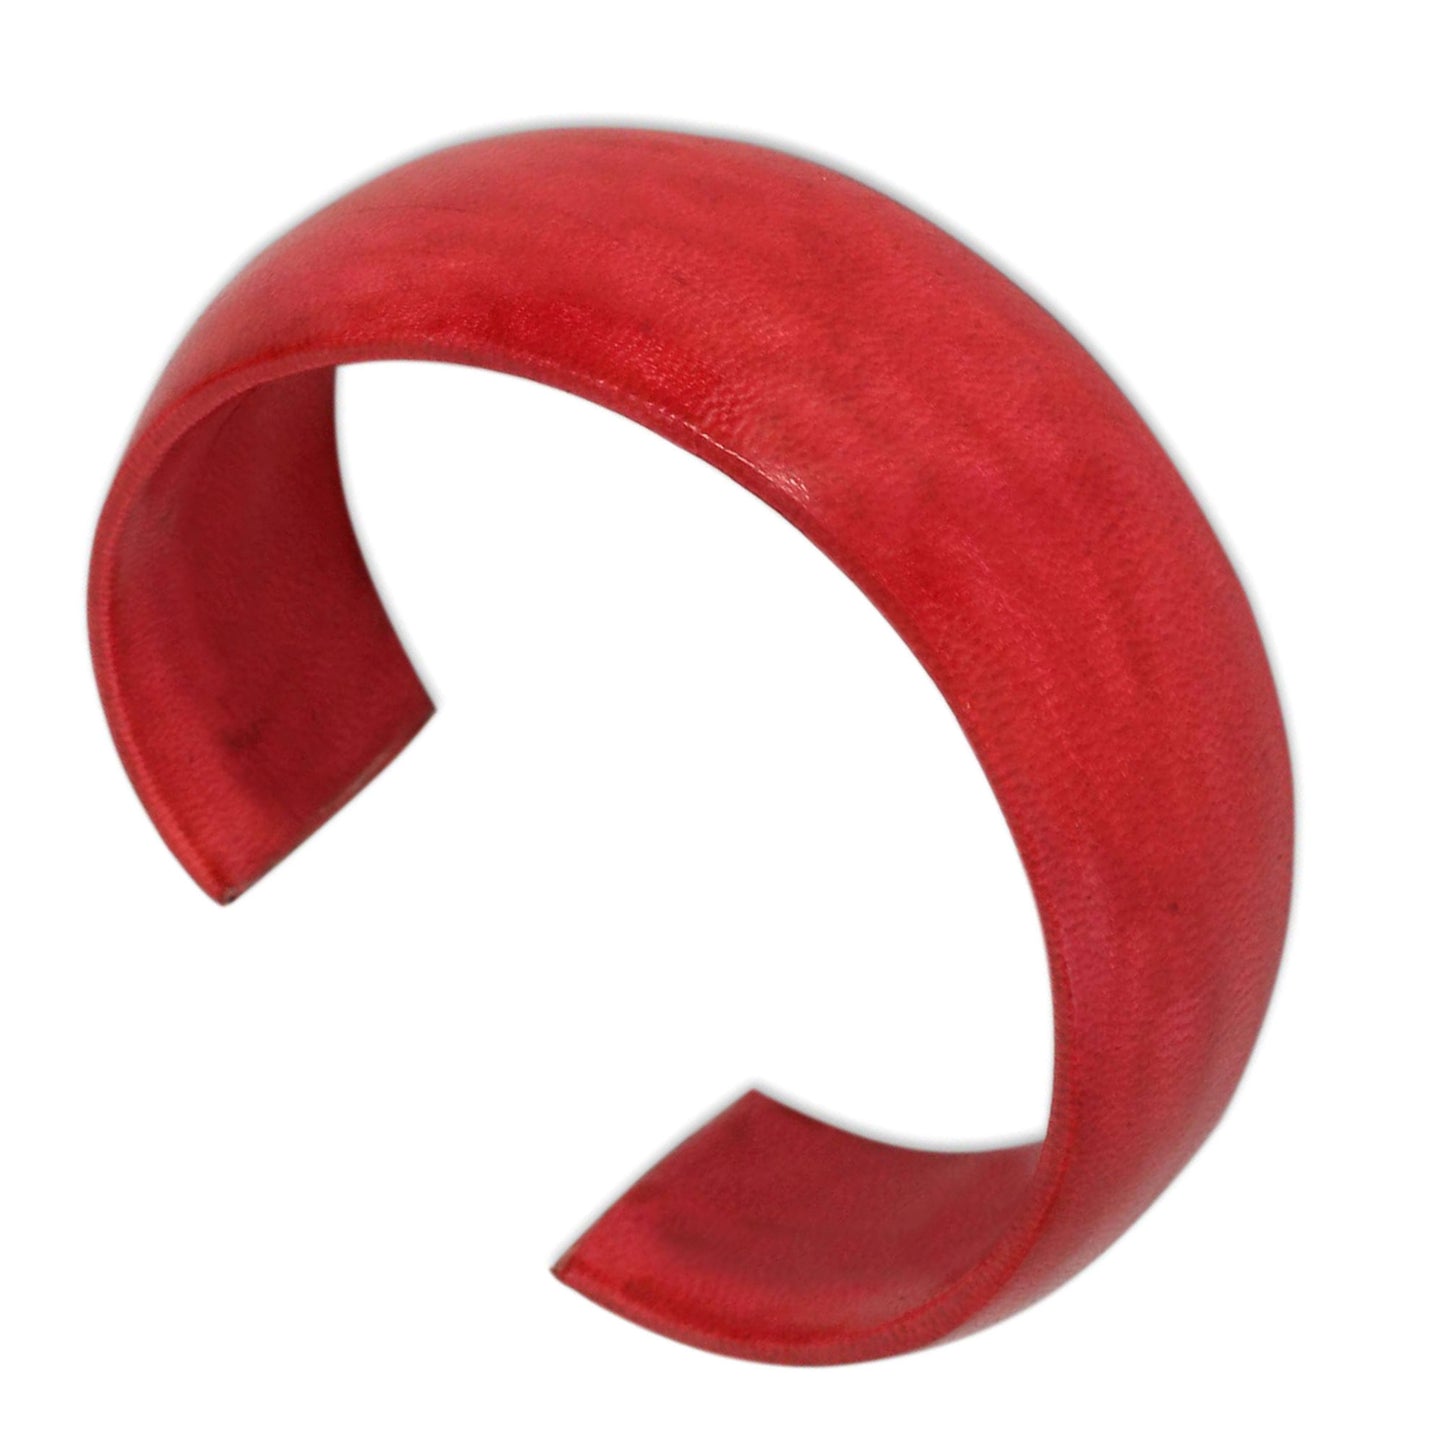 Annula in Red Leather Cuff Bracelet